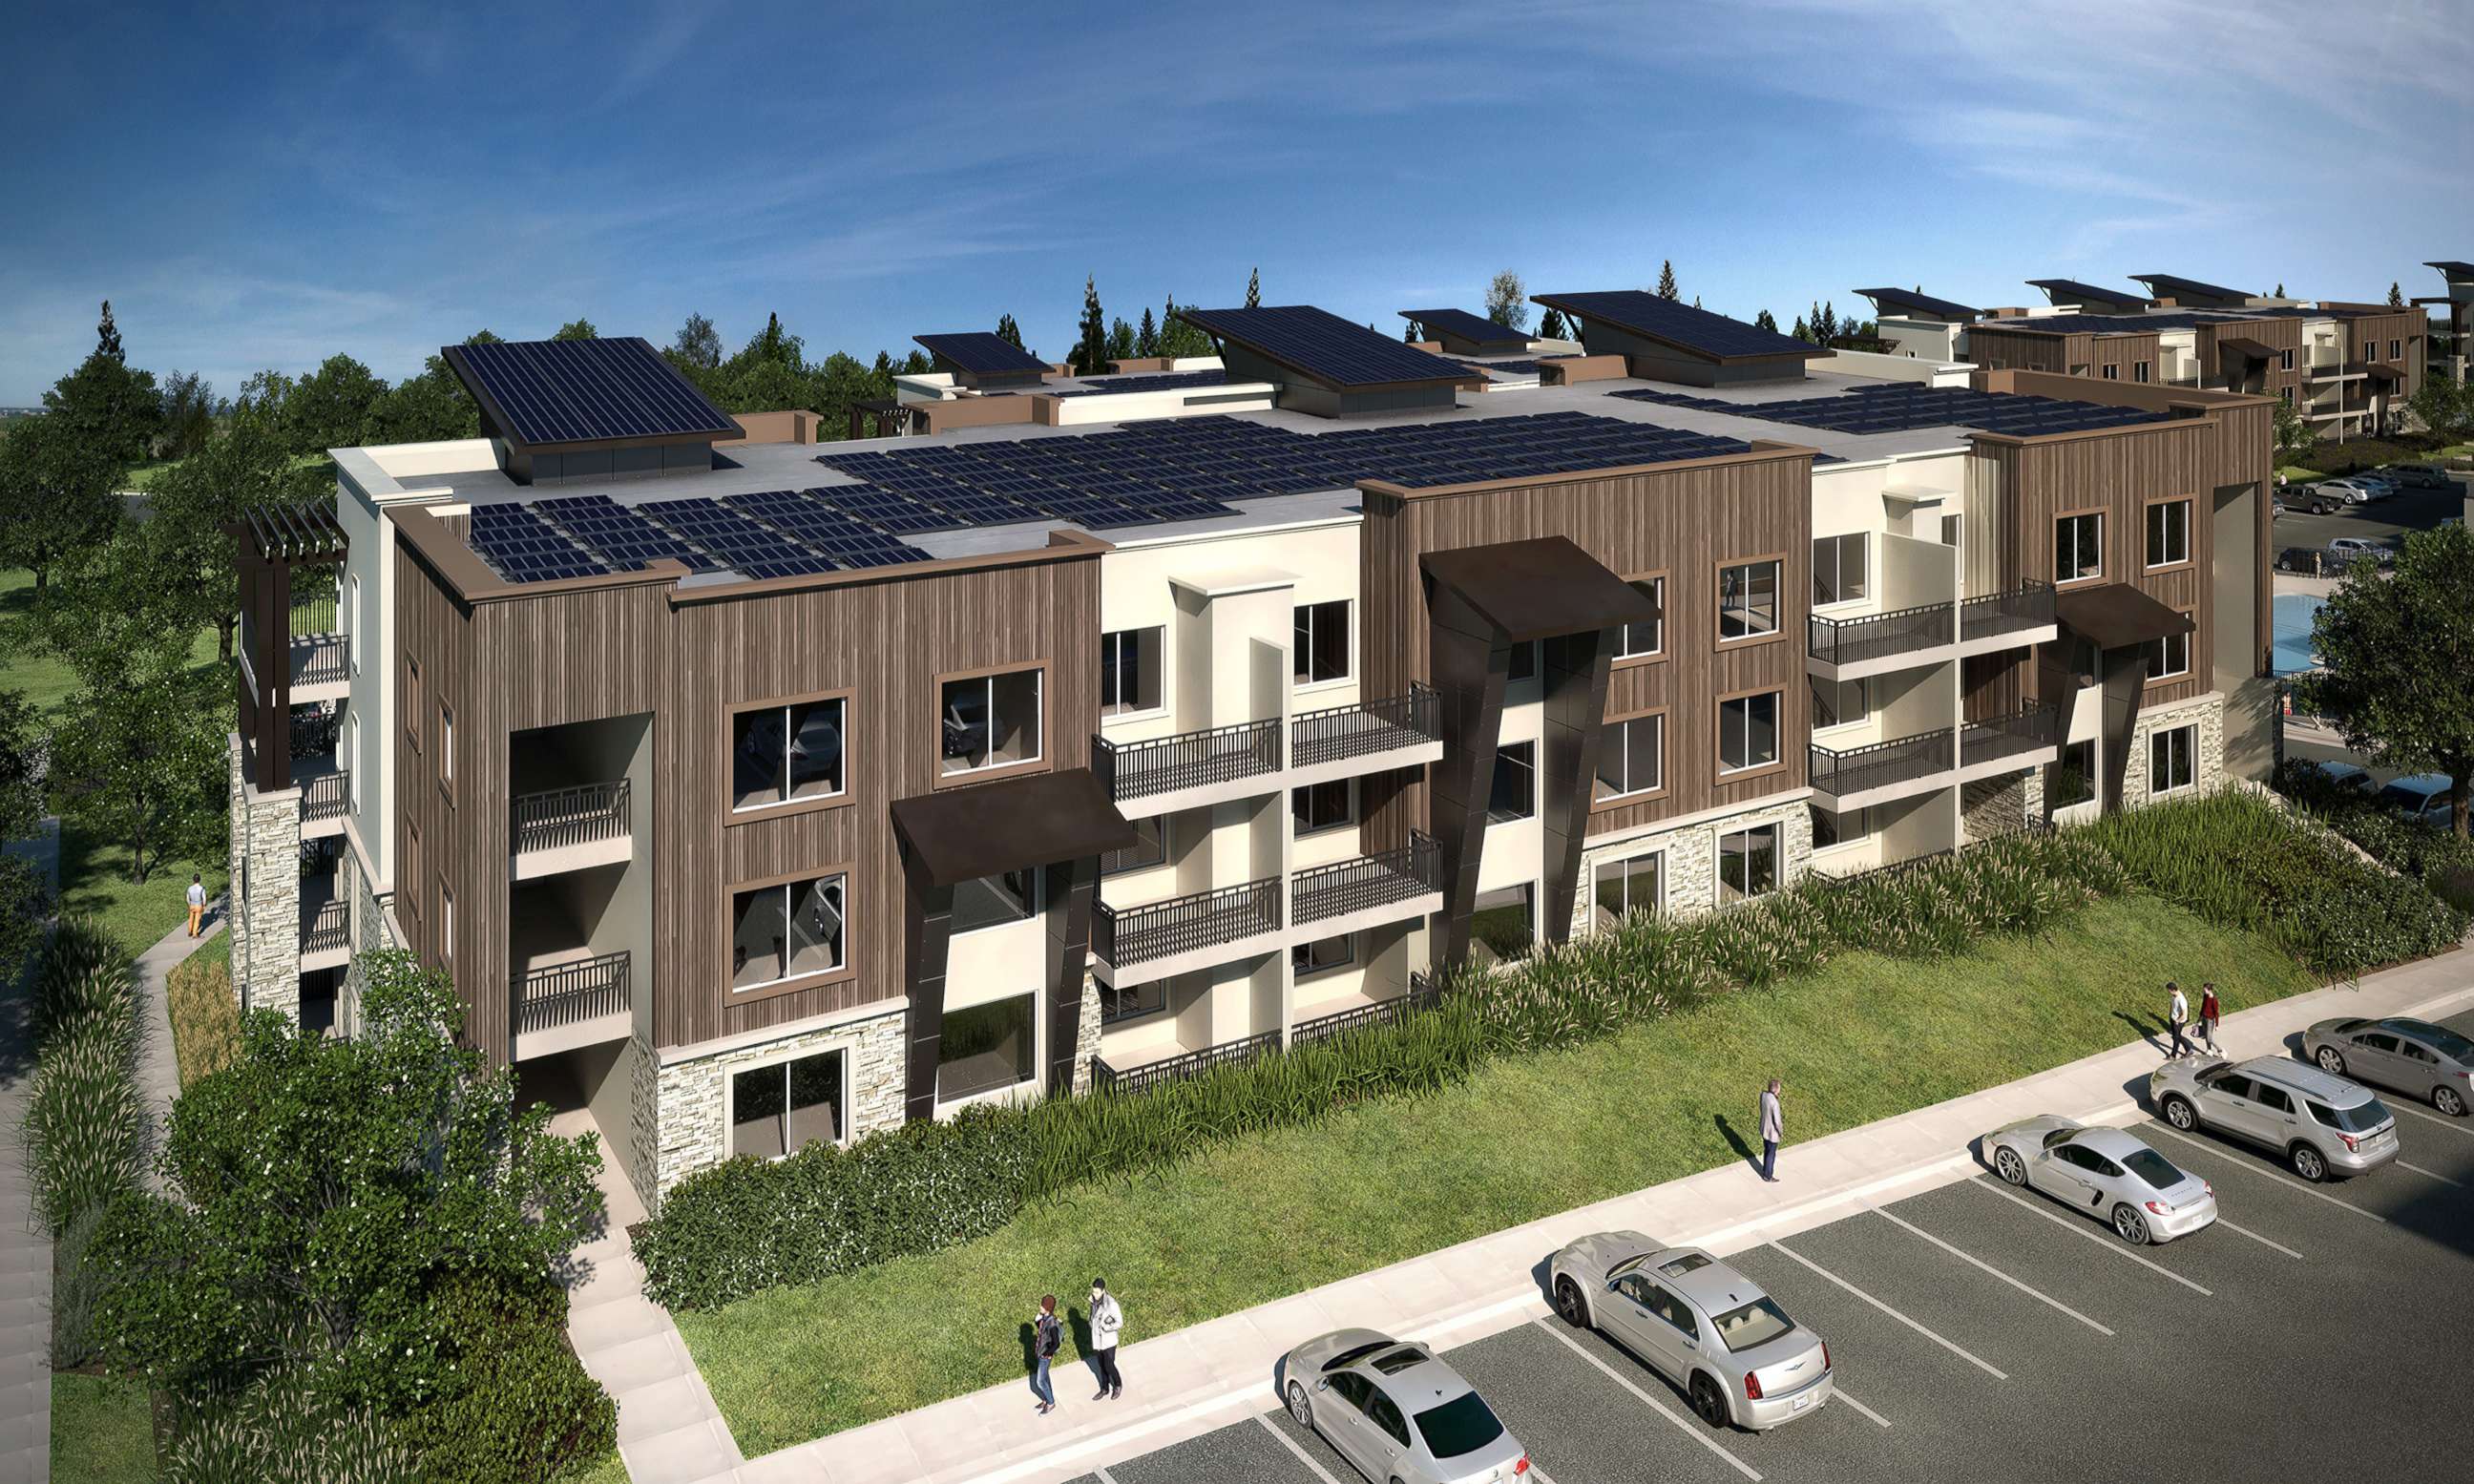 PHOTO: The Soleil Lofts apartment community in Herriman, Utah represents an all-electric residential community design that standardizes on-site energy storage in every unit.